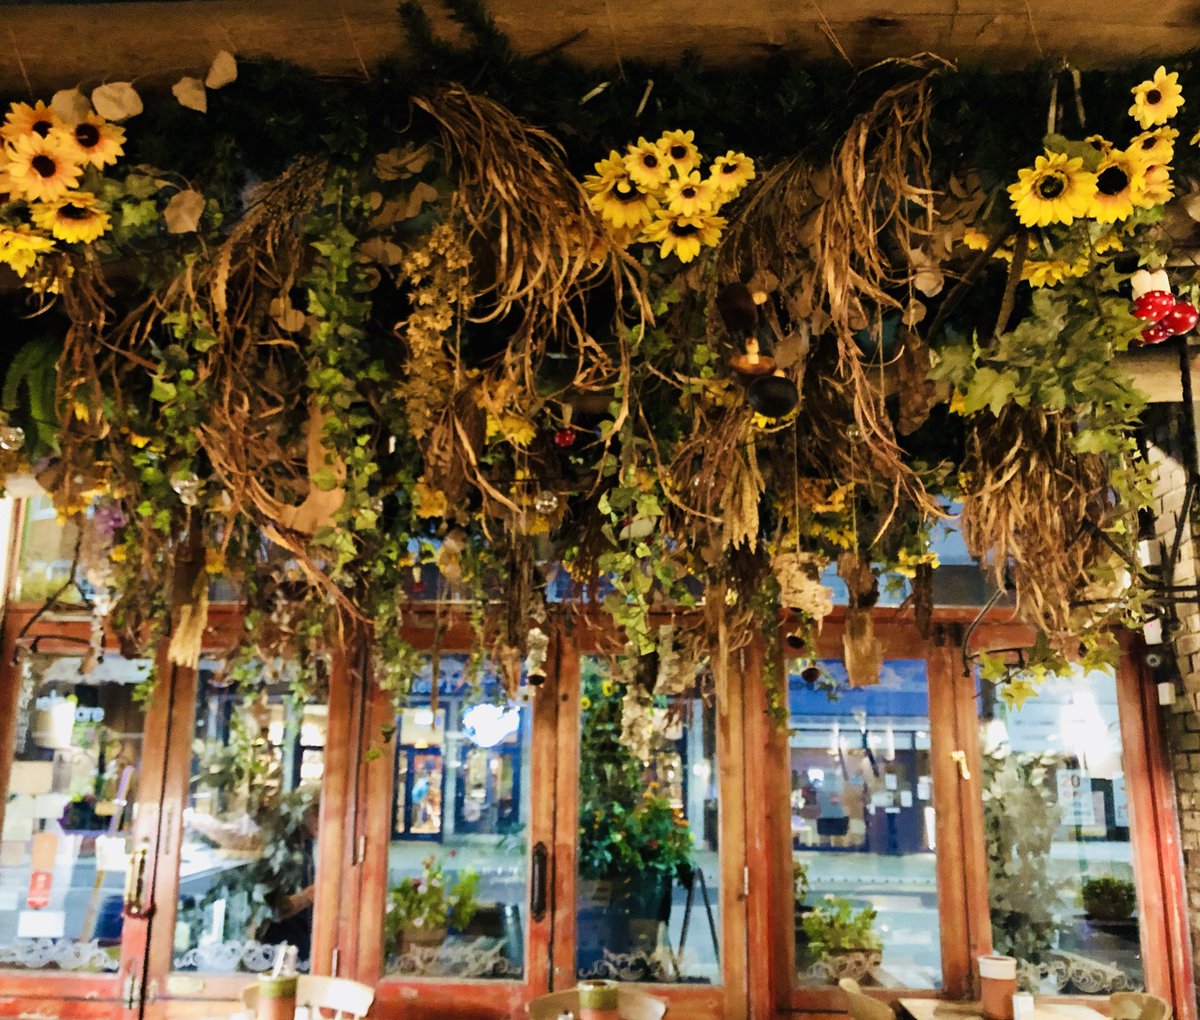 Great hanging #flower decor and wonderful food tonight @thelarderhouse in Bournemouth. Fabulous tapas shared with best and  precious friends. We enjoyed the house #Tempranillo too ! Thank you so much for a wonderful evening.  
•
#foodandwineheaven #Bournemouth  #foodies #wine